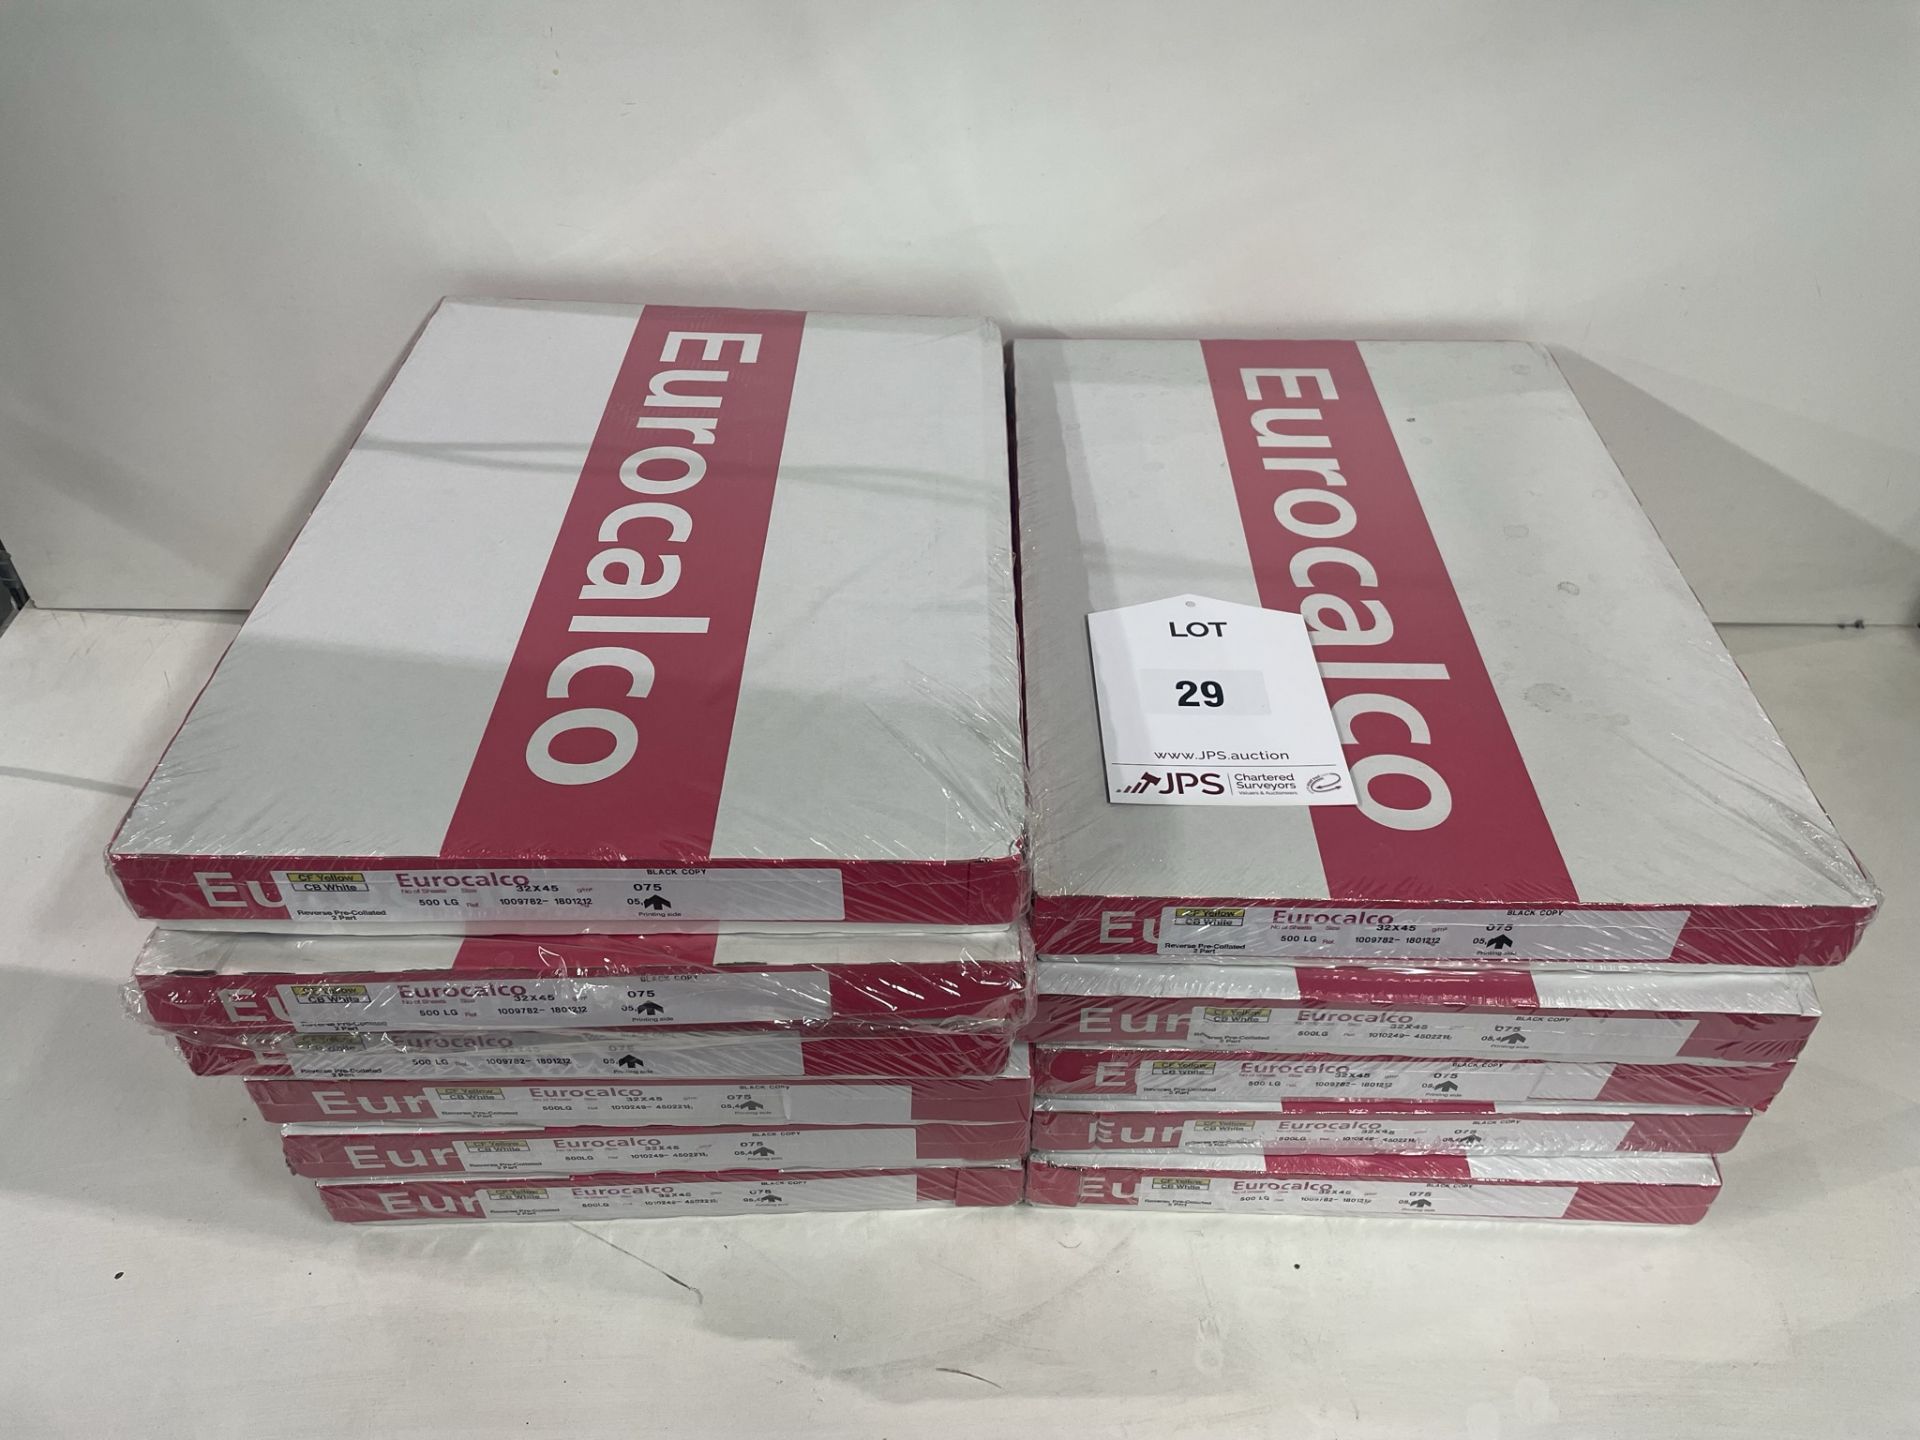 10 x Packs of Eurocalco 32x45 White/Yellow Digital Printing Paper | 500 sheets per pack - Image 2 of 3